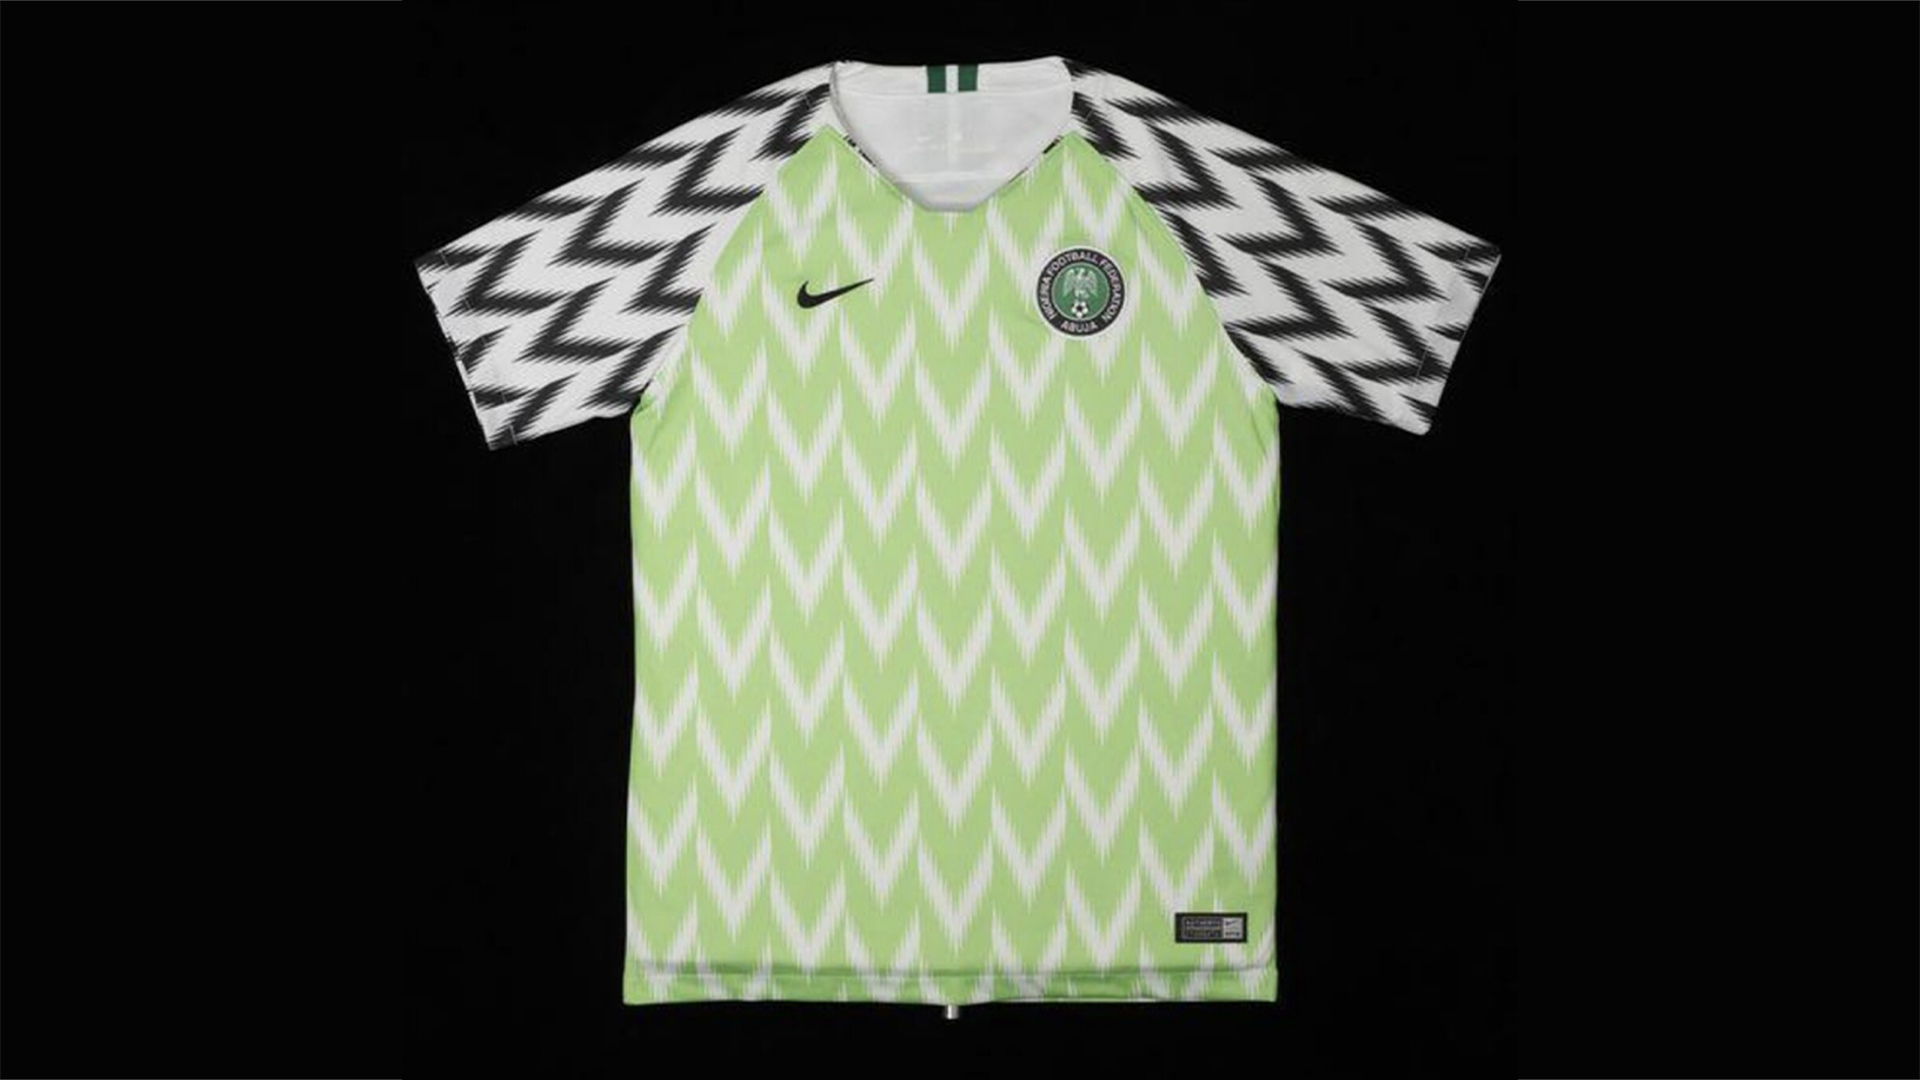 Green, black and white Nike Nigerian football kit with